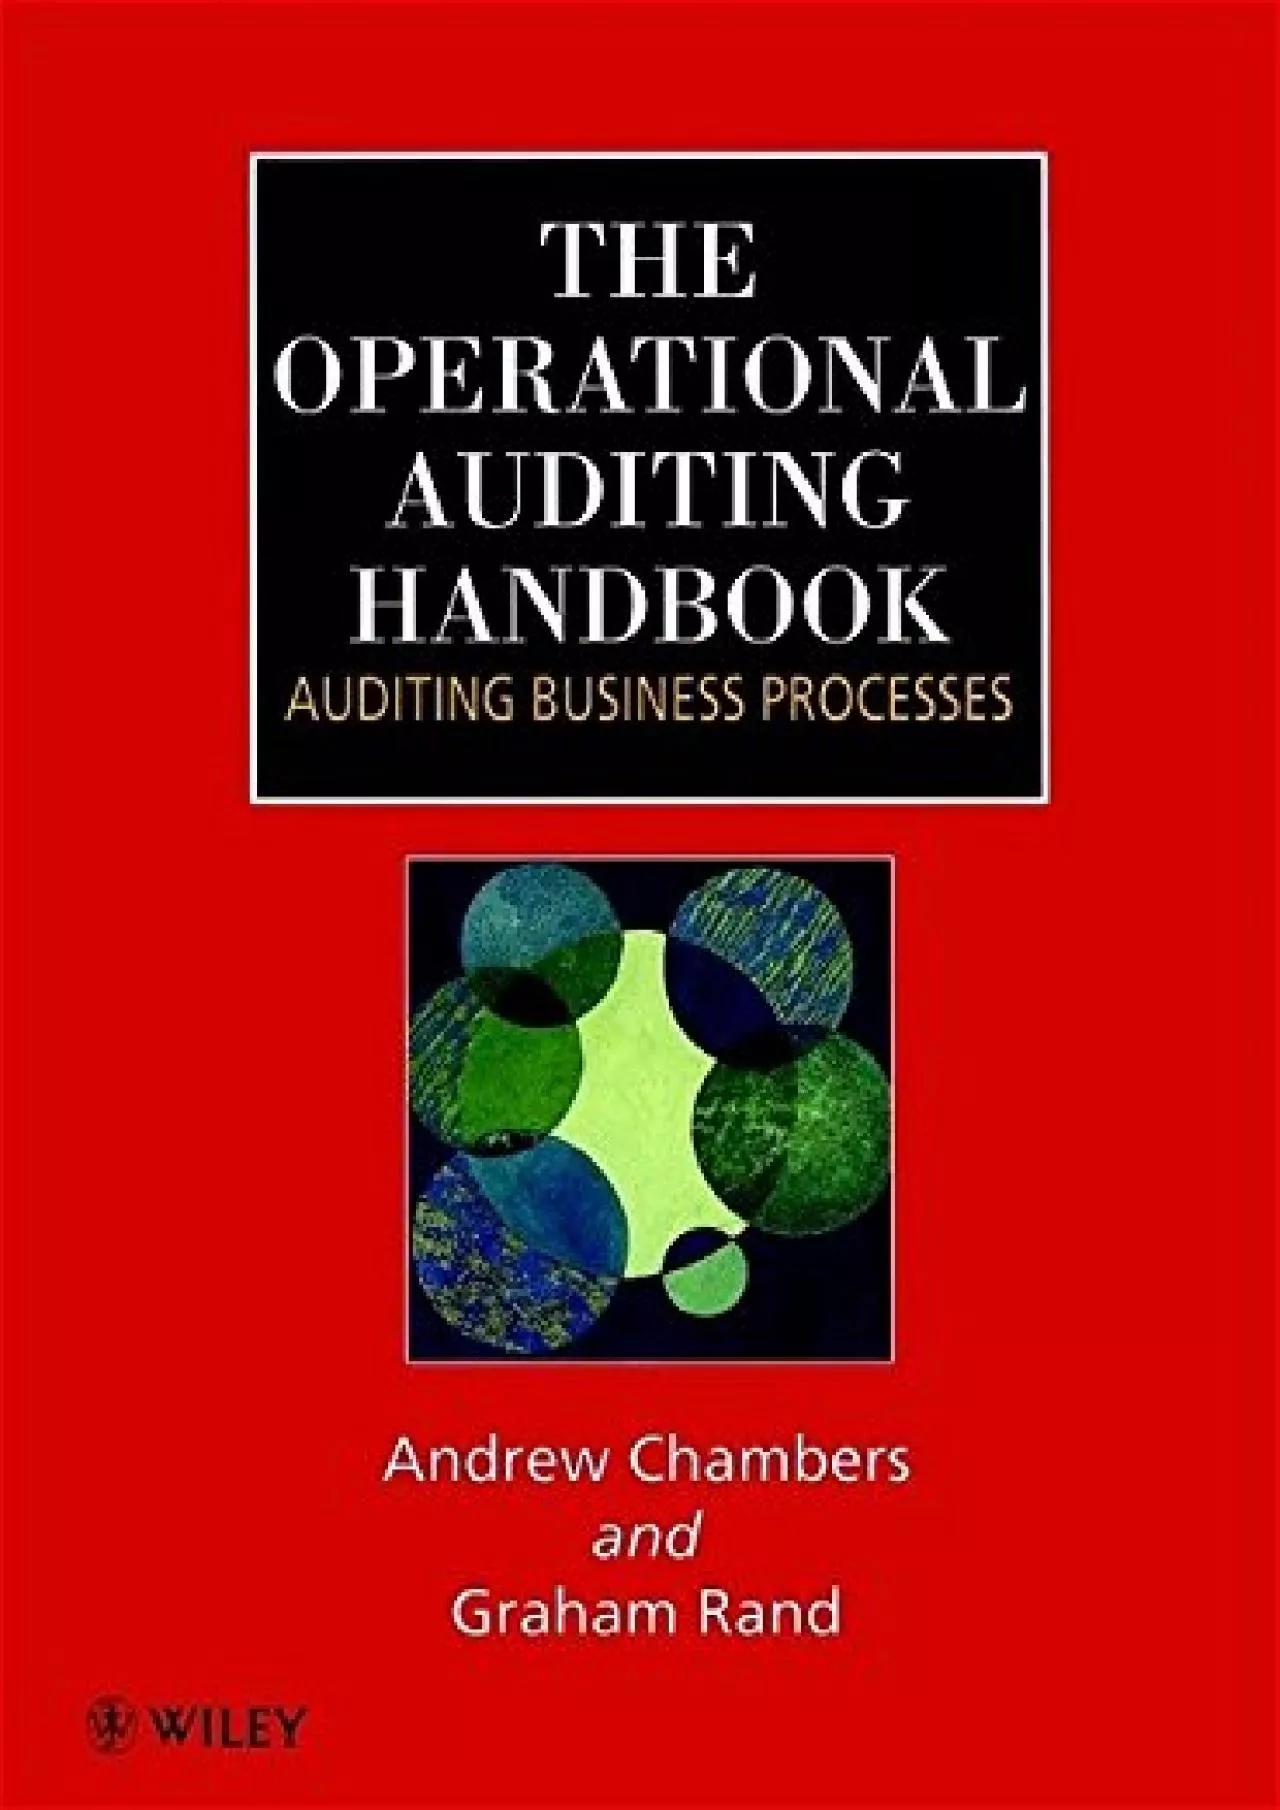 (BOOK)-The Operational Auditing Handbook: Auditing Business Processes